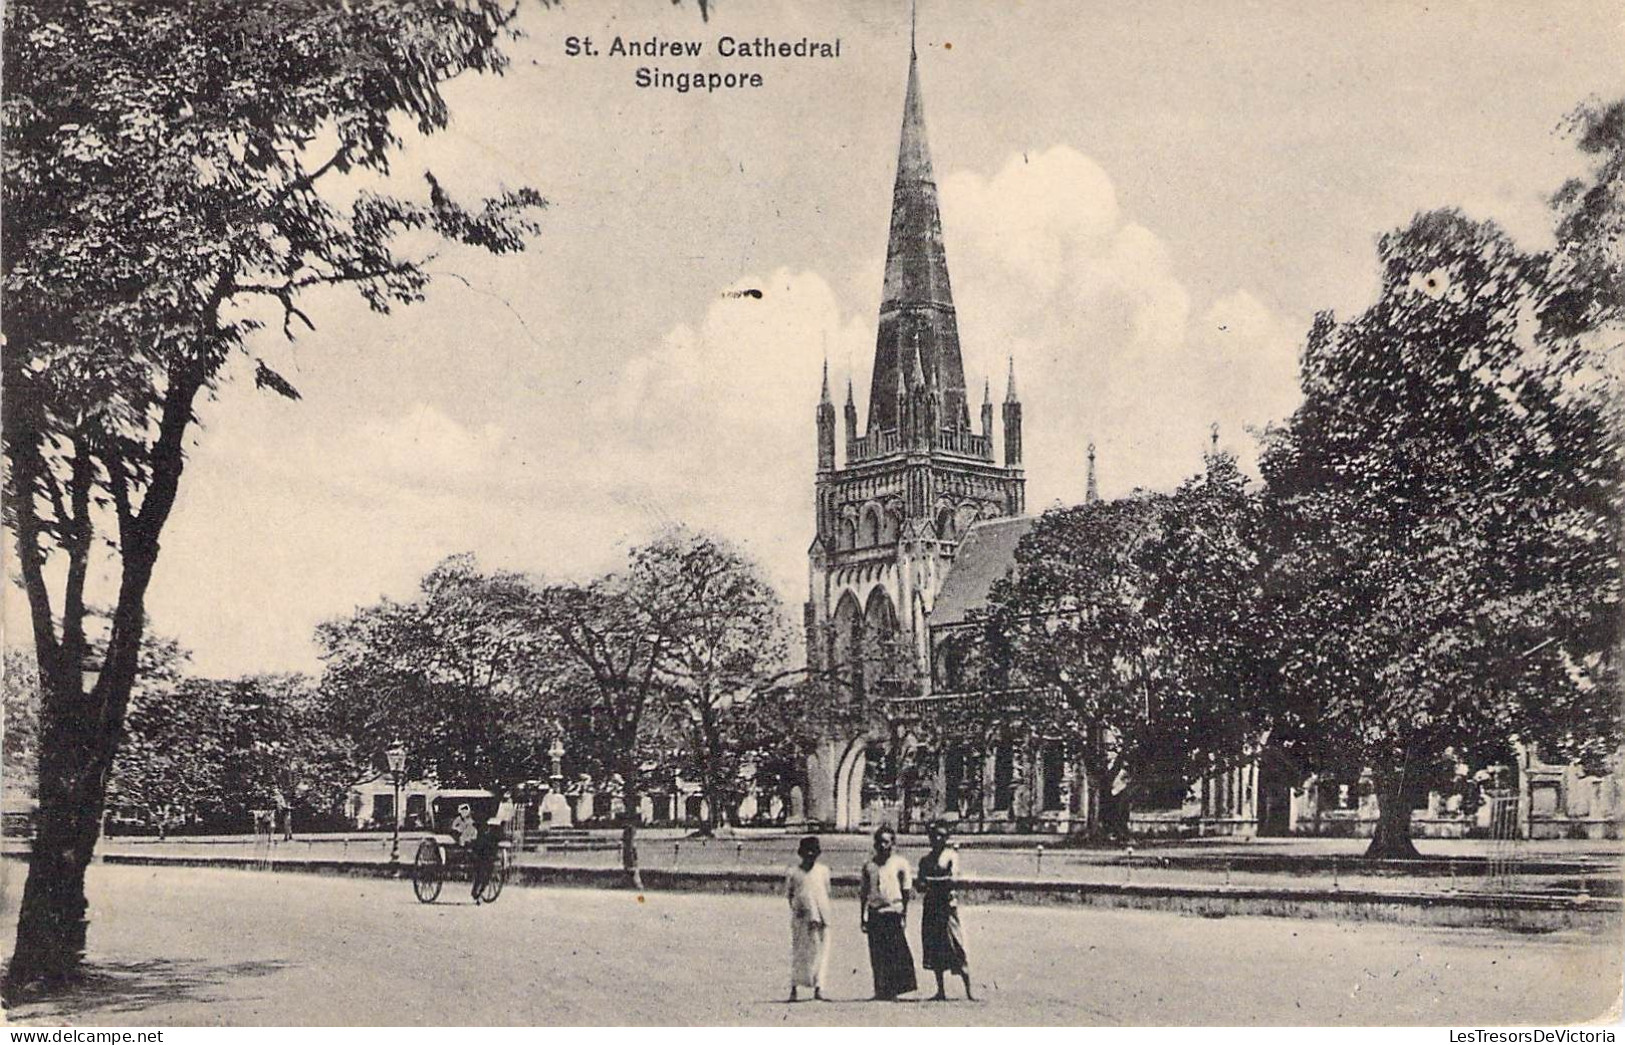 Chine - St Andrew Cathedral - Singapore - Singapoure - Animé  - Carte Postale Ancienne - China